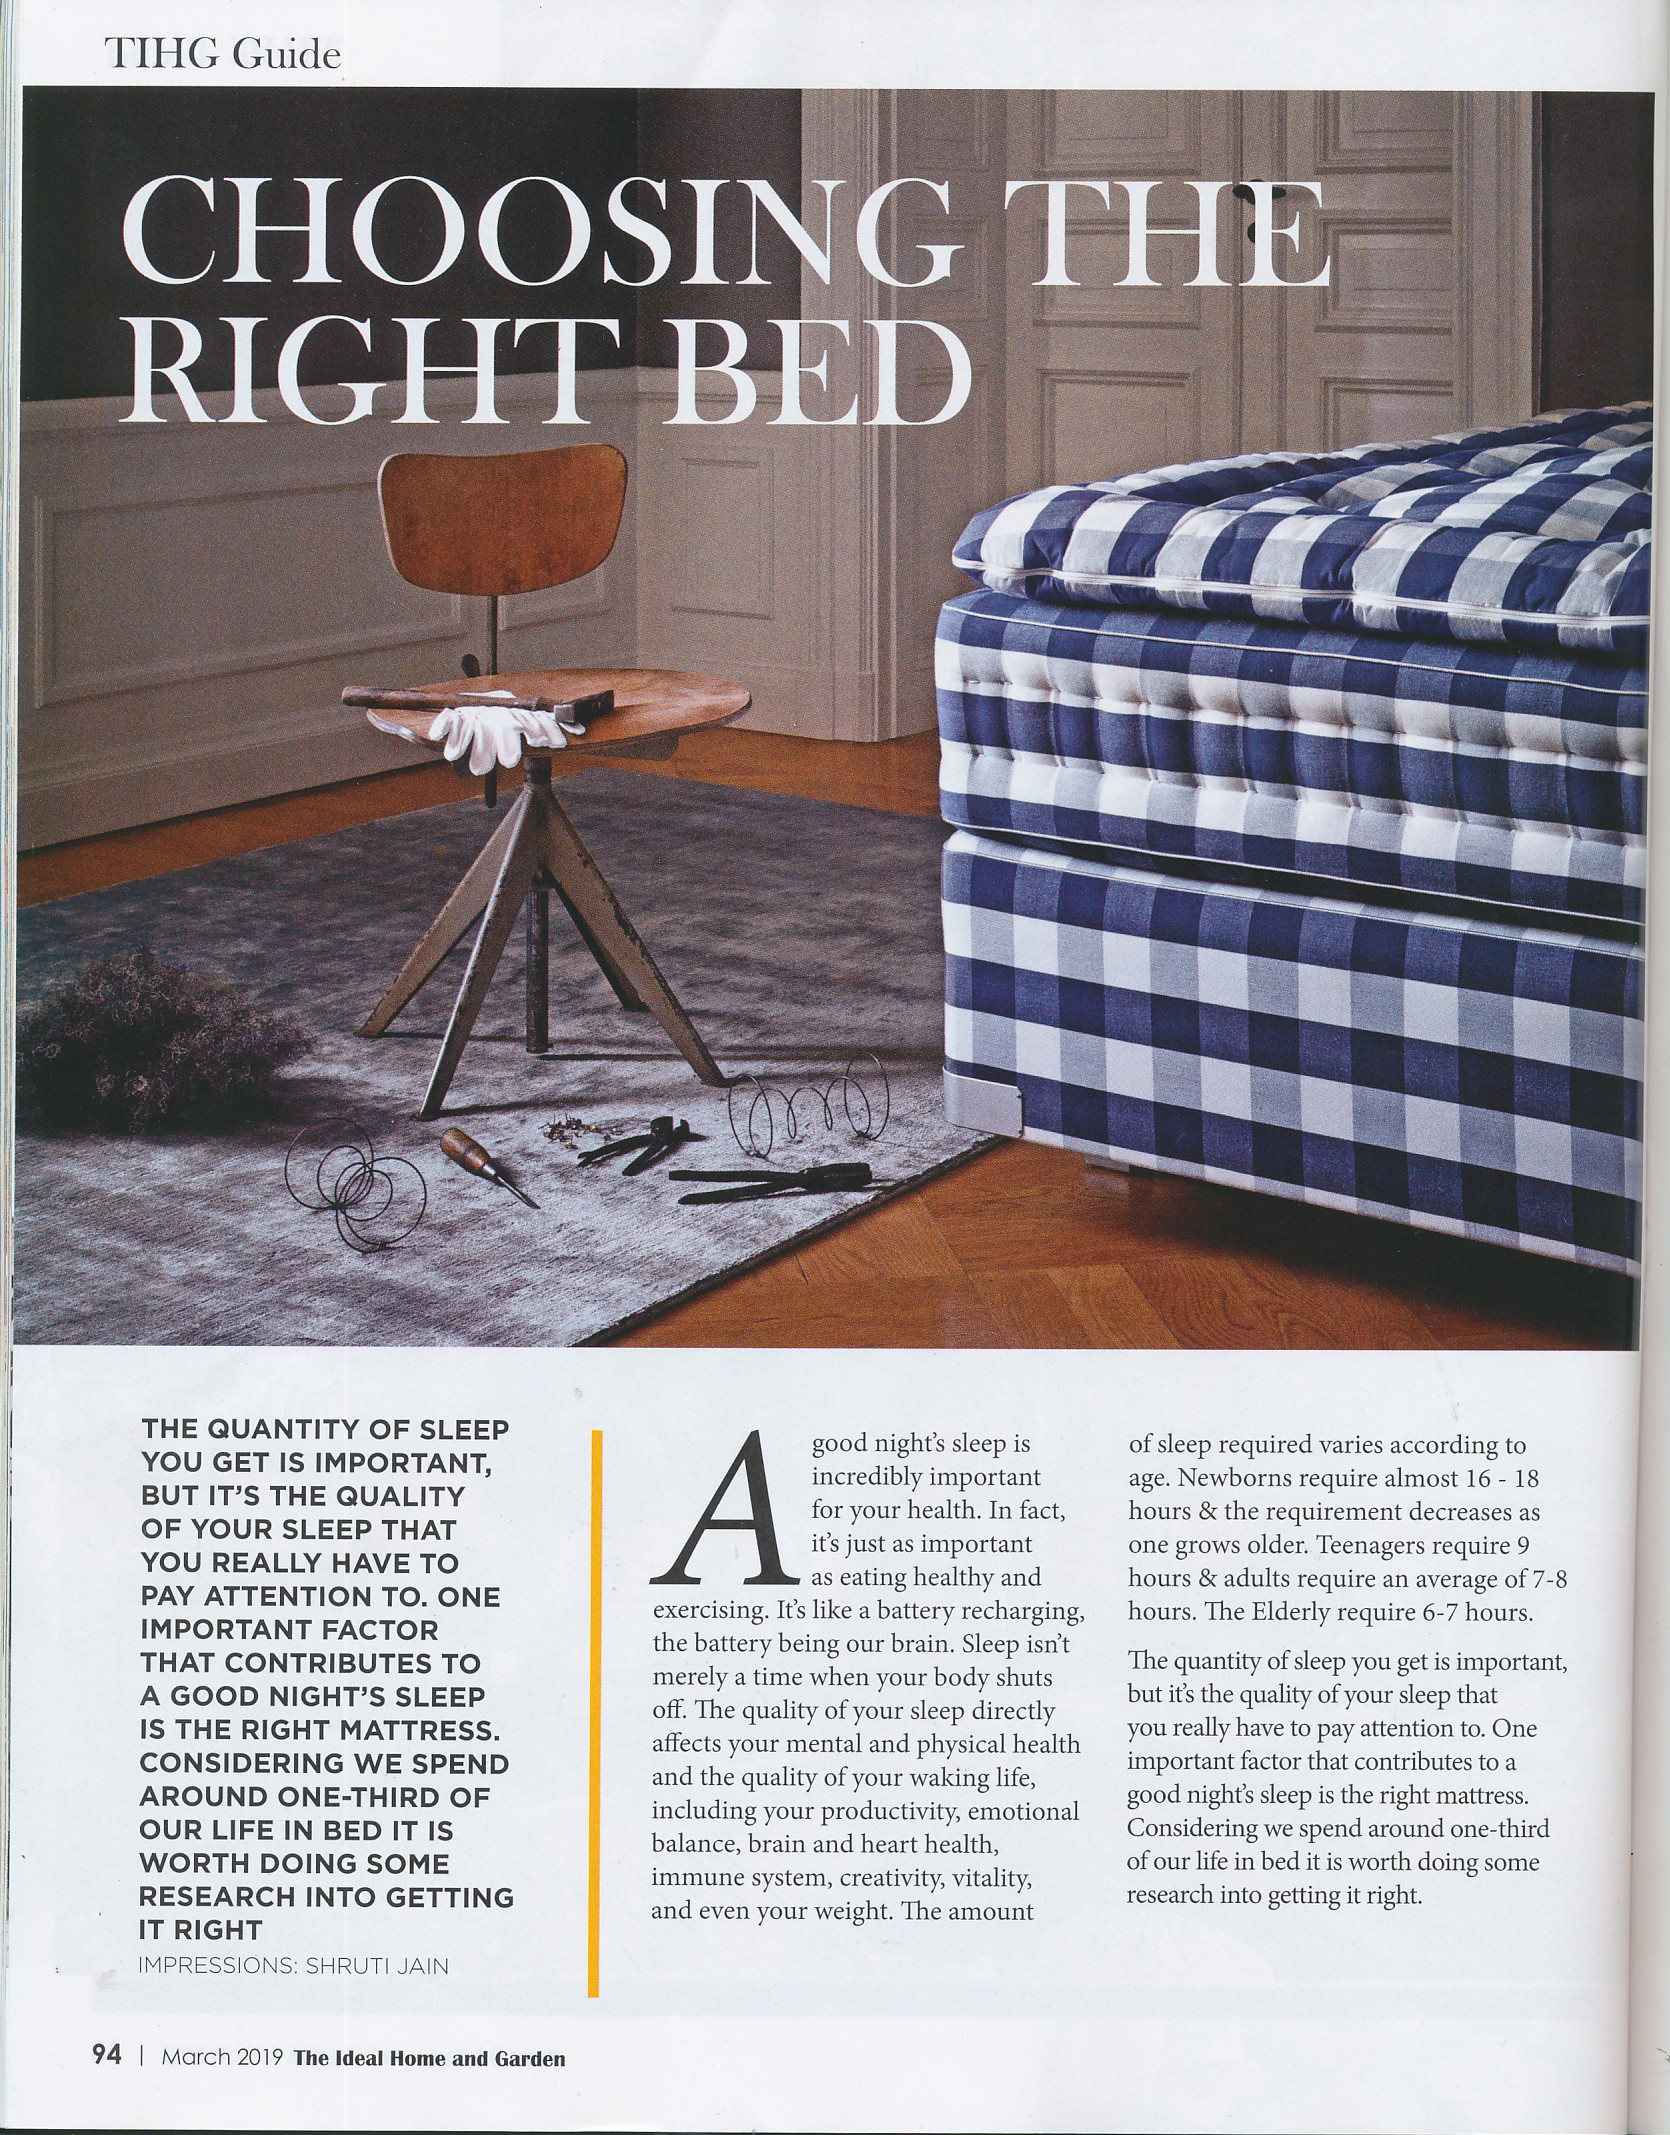 Choosing the right bed